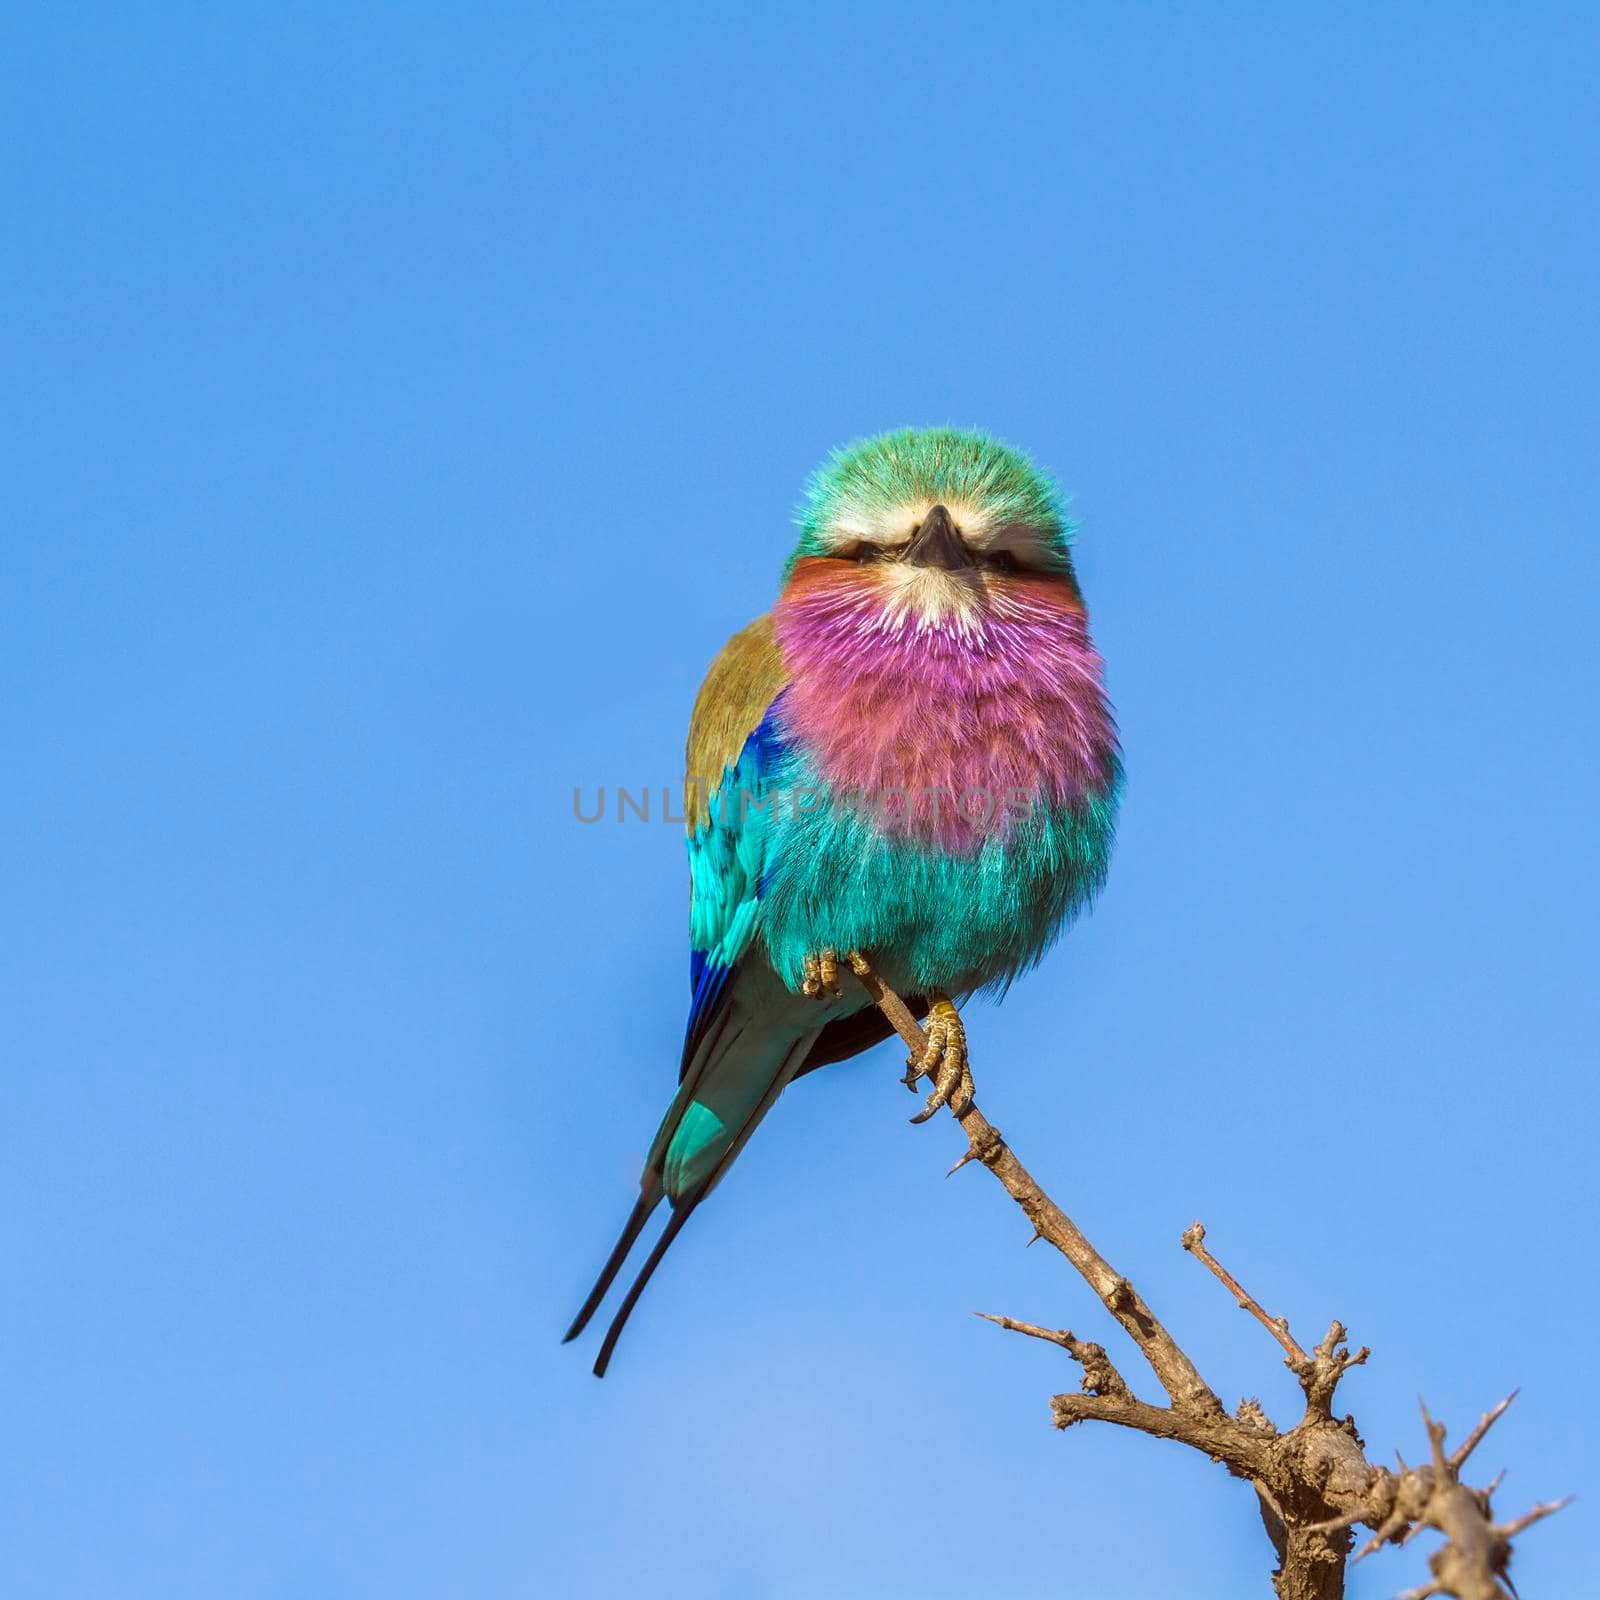 Lilac-breasted roller in Kruger National park, South Africa by PACOCOMO